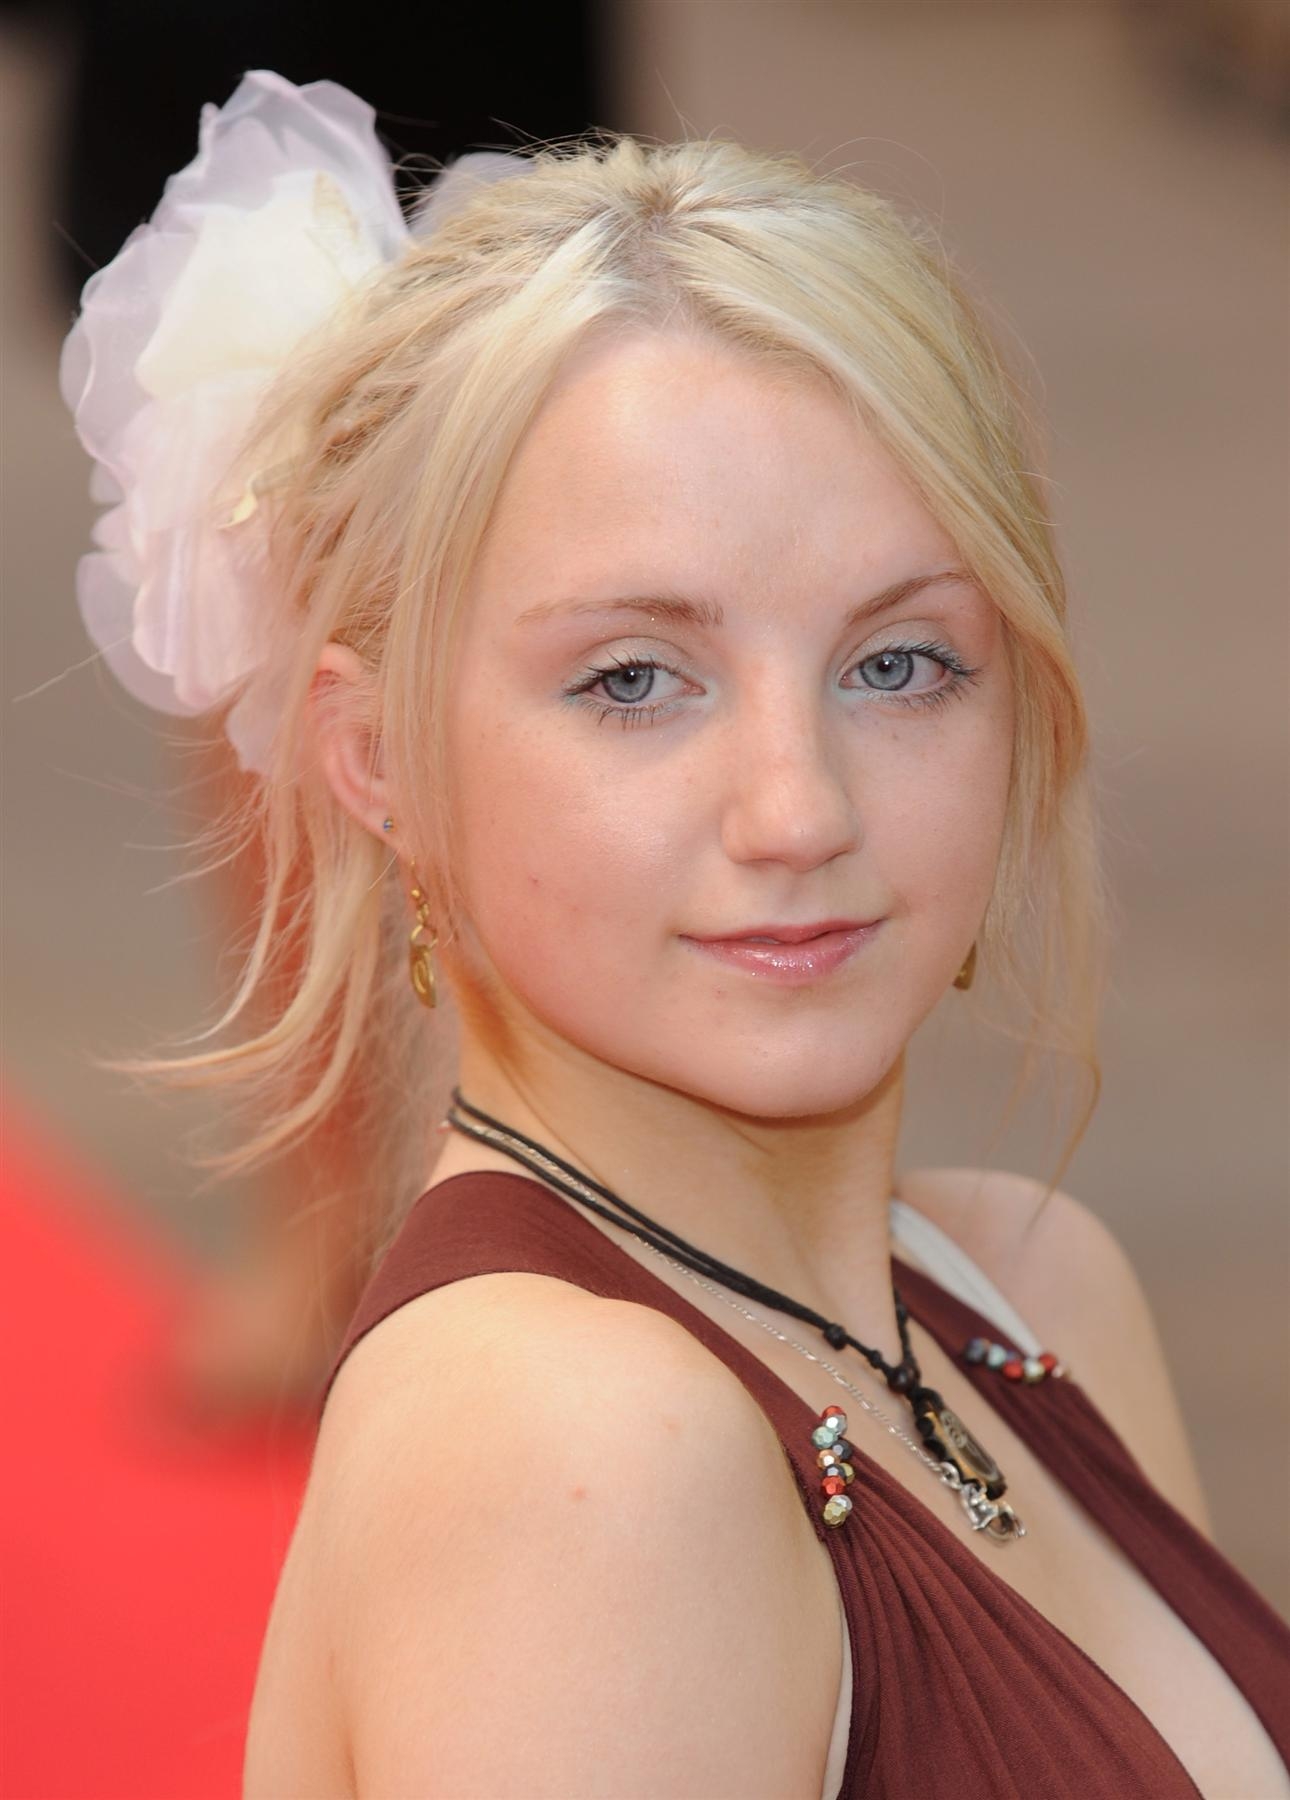 Download Wallpapers Download 960x800 evanna lynch